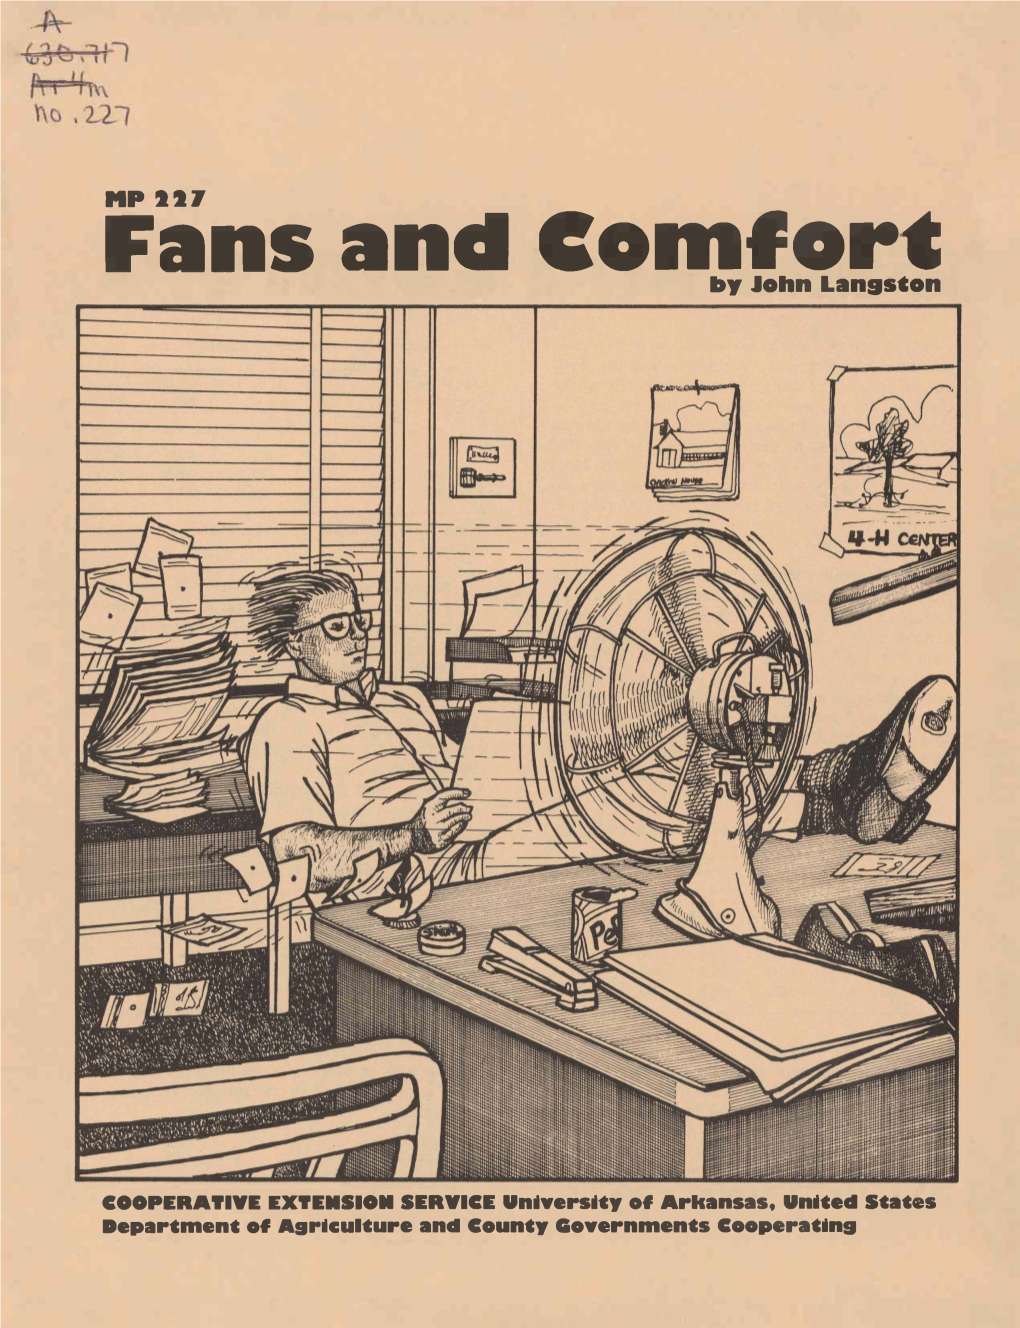 Fans and Comfort by John Langston